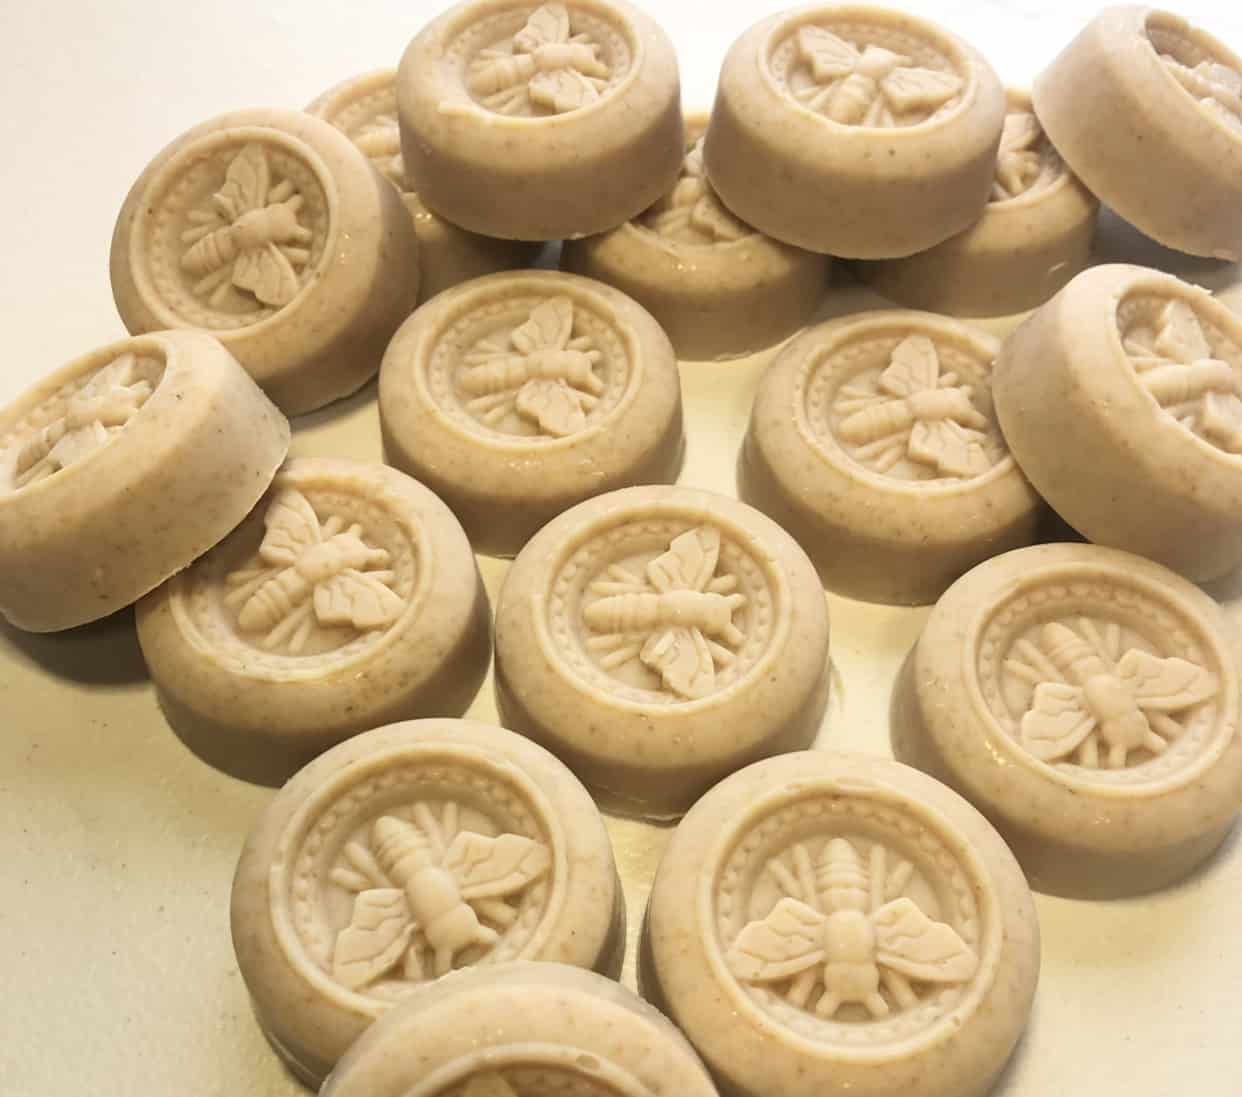 Honey and Oat Soap rounds